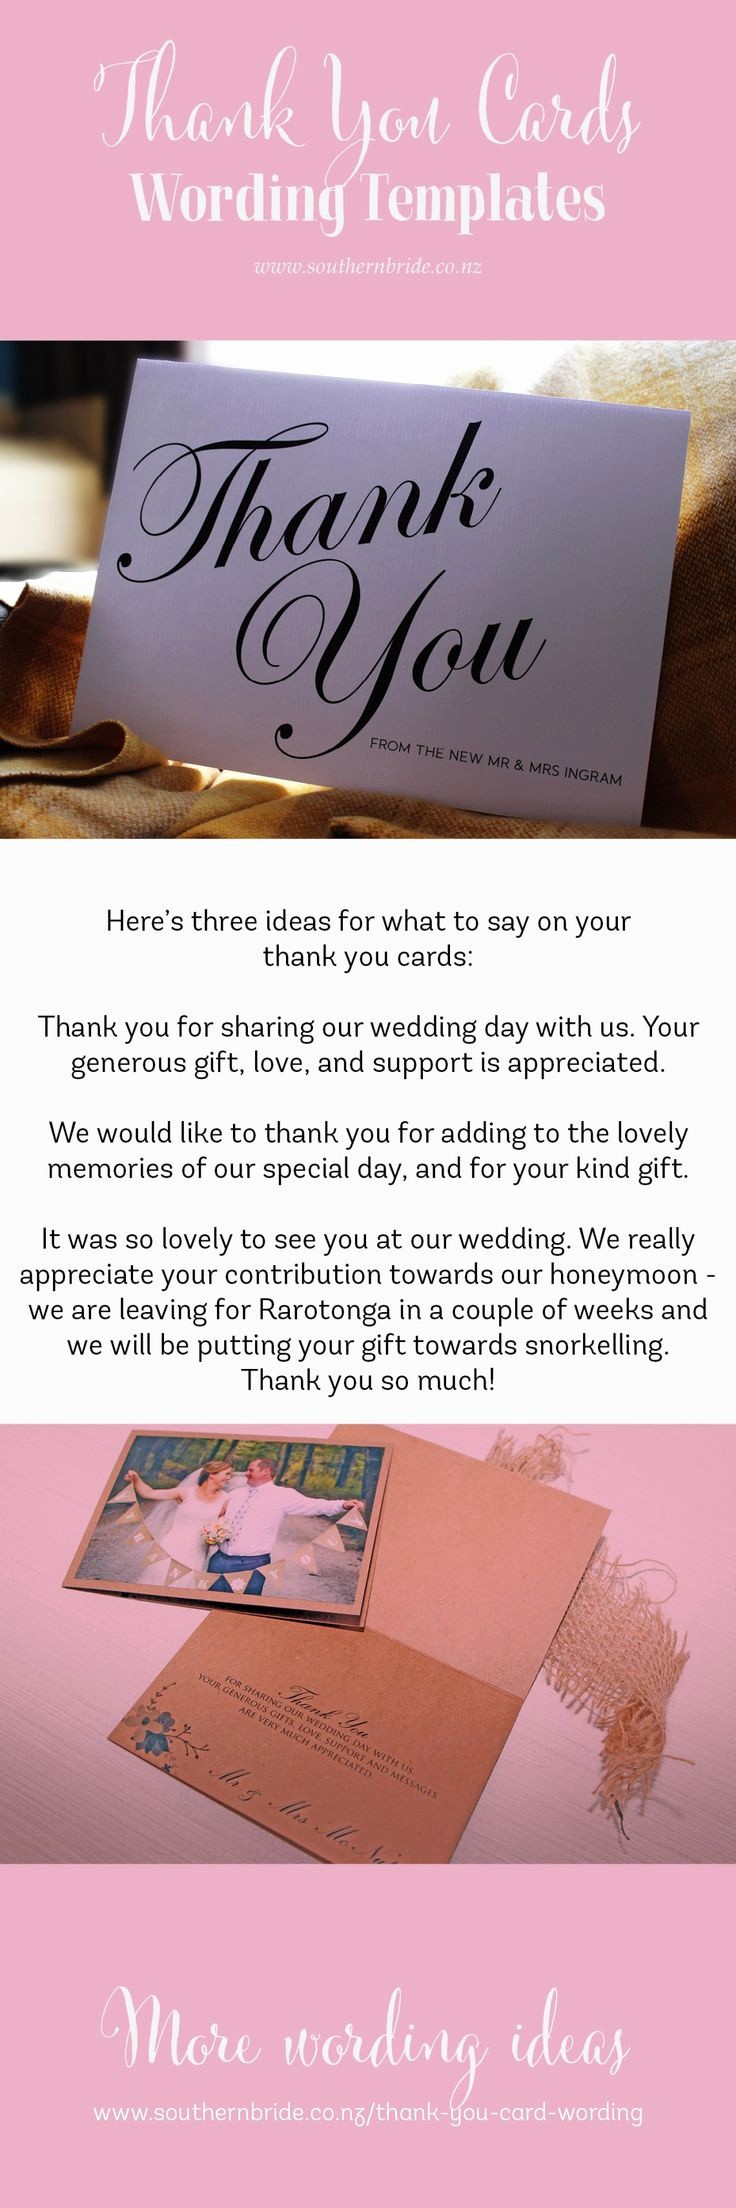 Words for Thank You Cards Beautiful 1000 Ideas About Thank You Card Wording On Pinterest